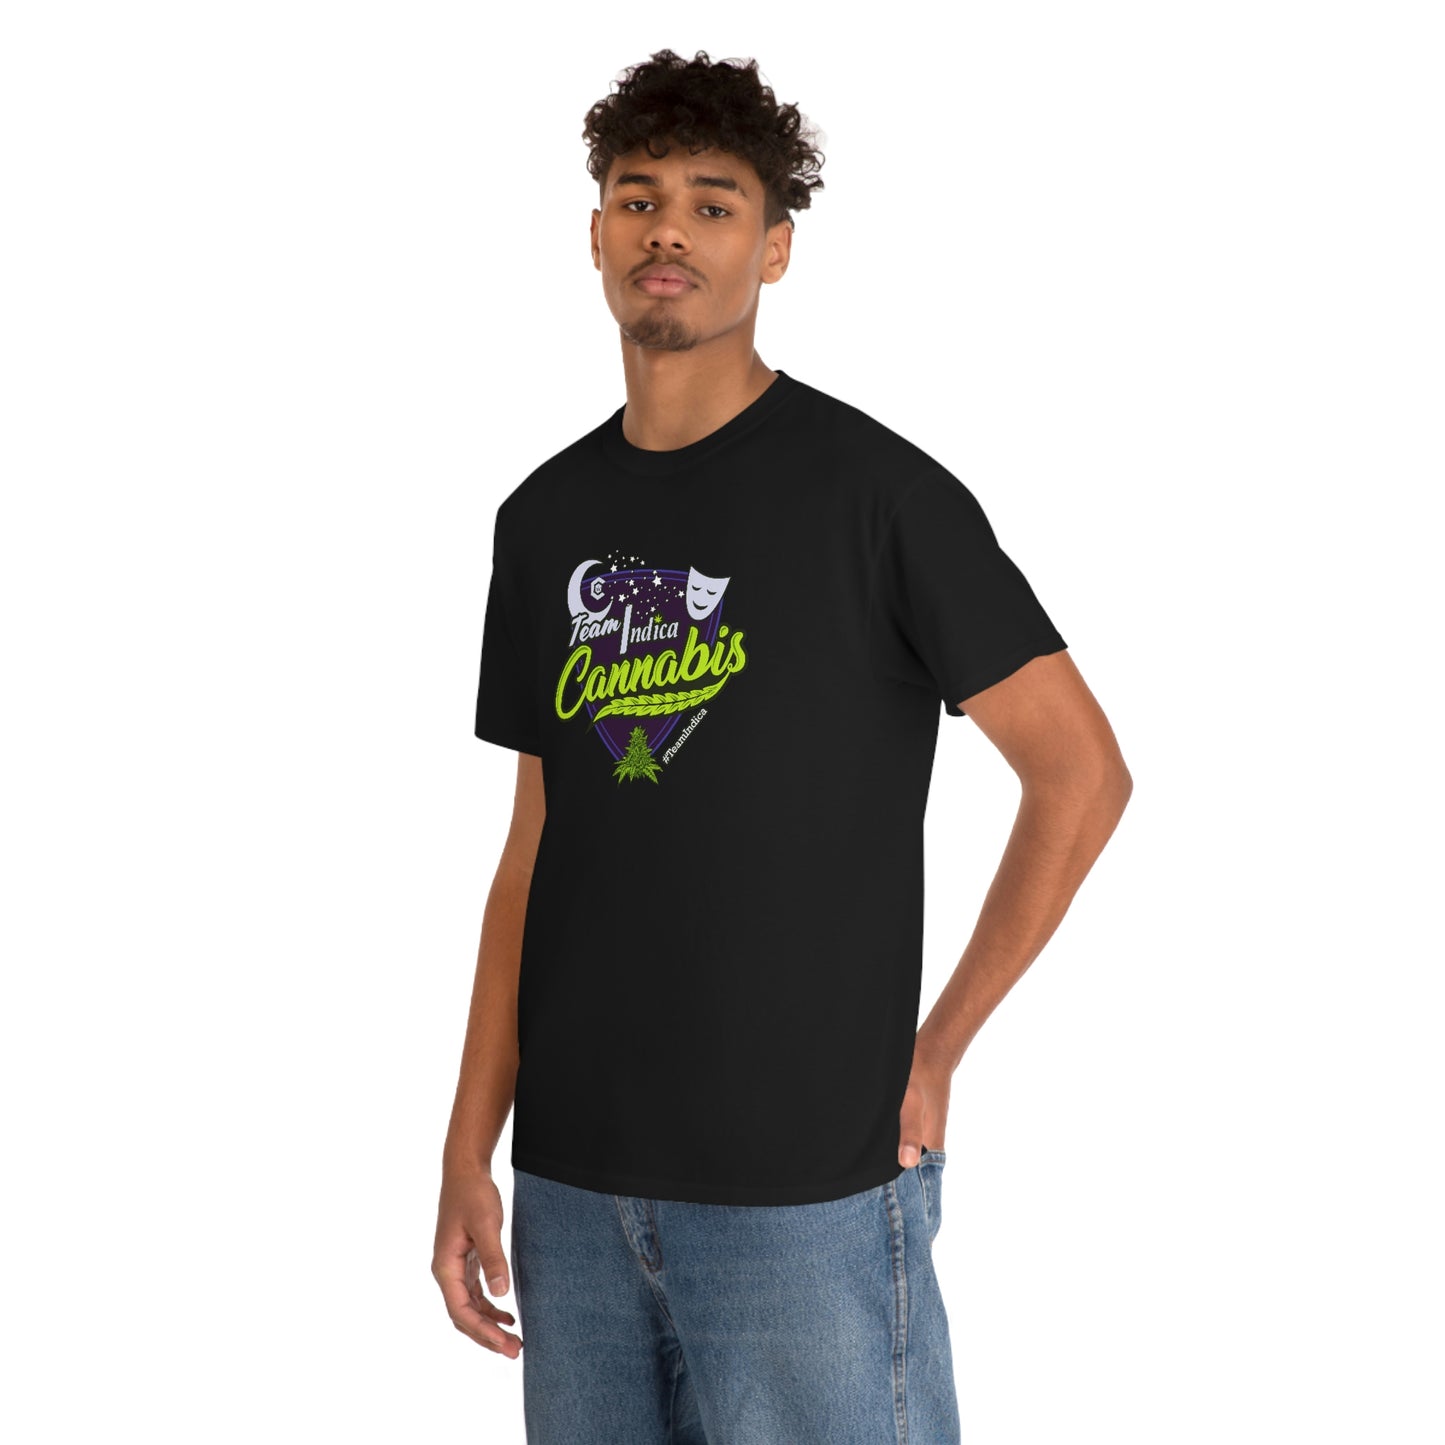 A man wearing a Team Indica Cannabis T-Shirt with a green and purple logo.